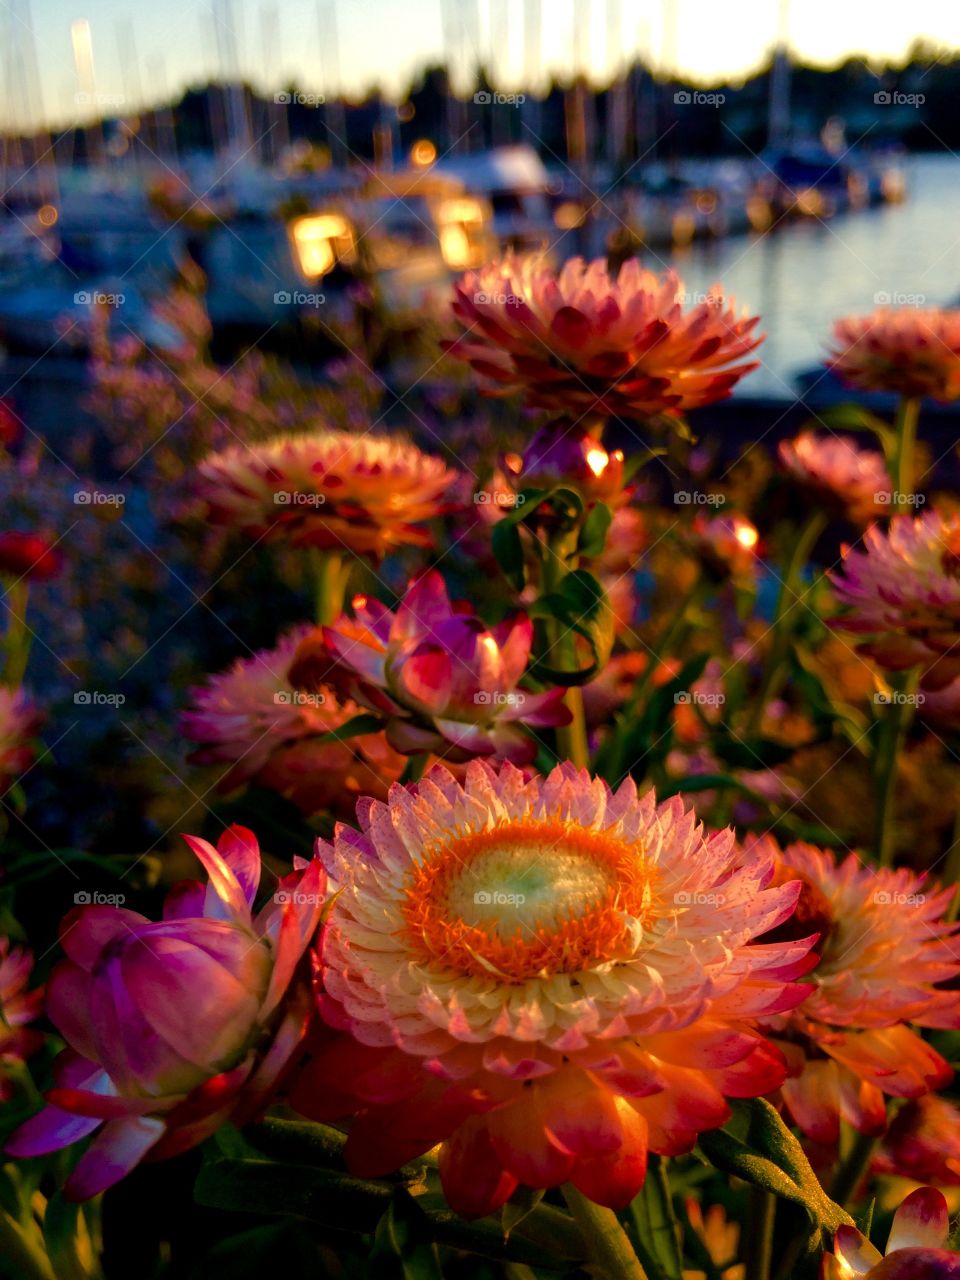 Flowers at sunset 